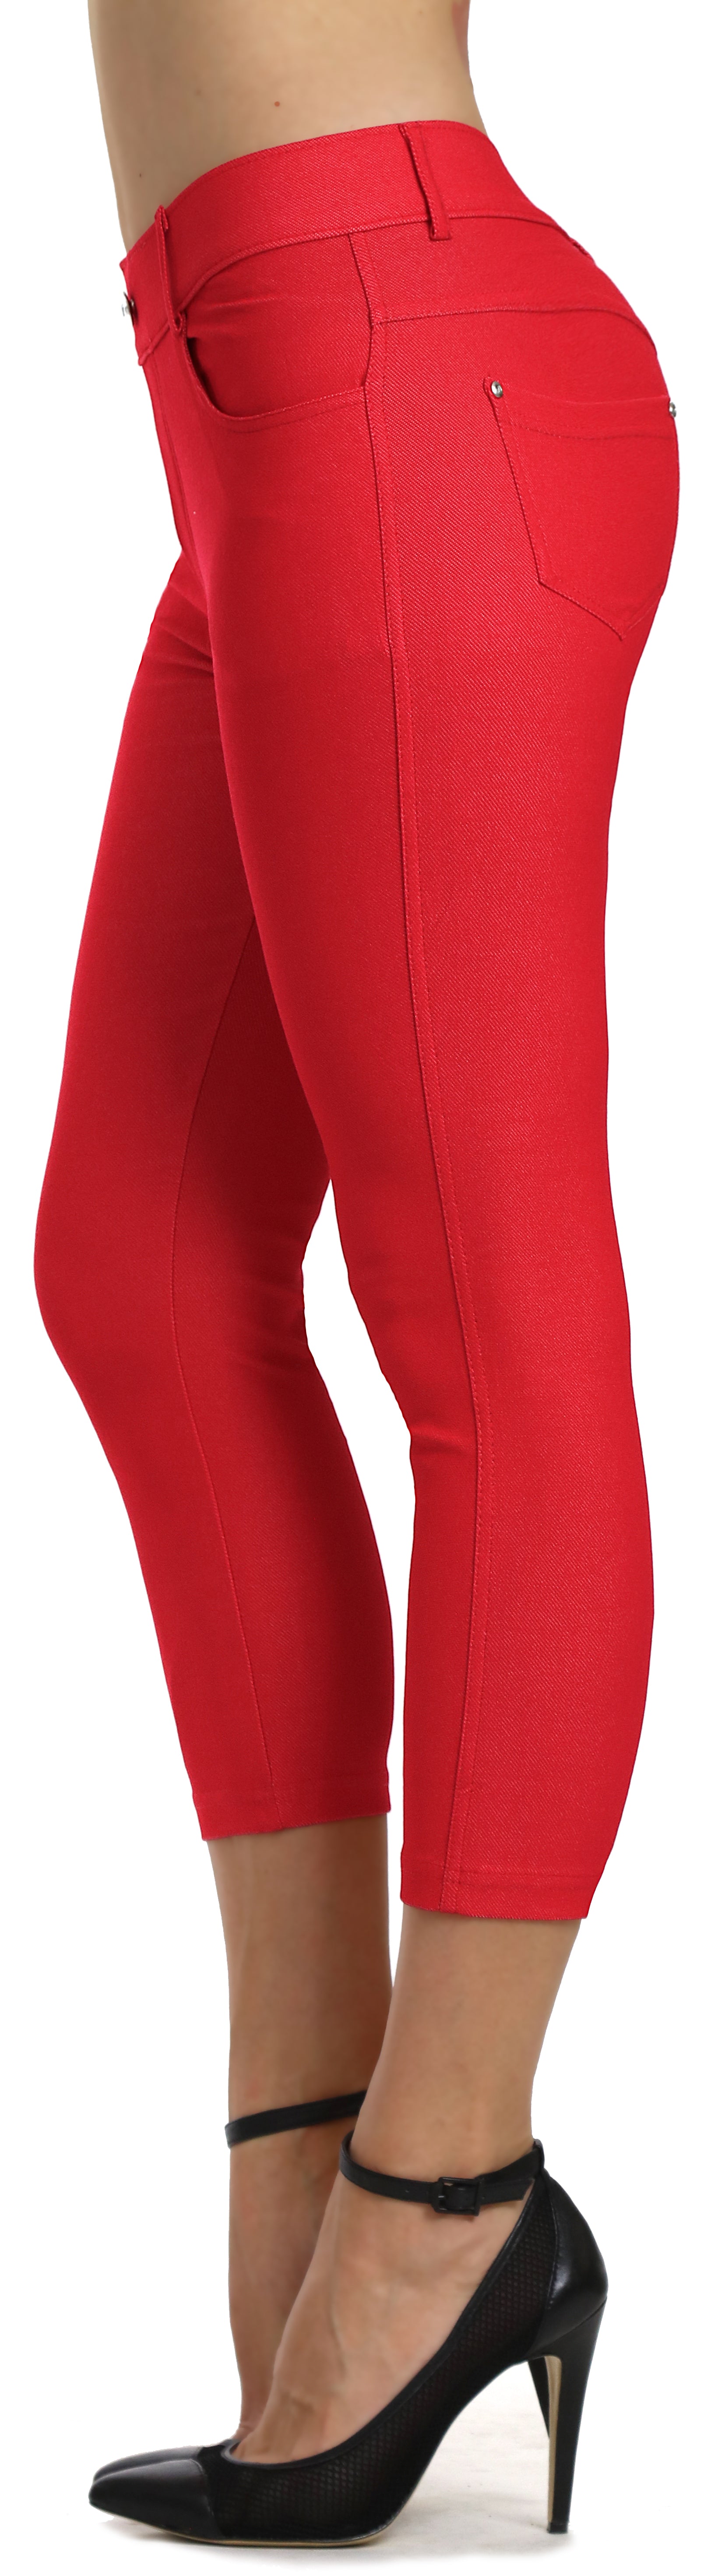 Time and Tru Women's Capri Jeggings X-Small (0-2) Coral Red NWT - Helia  Beer Co